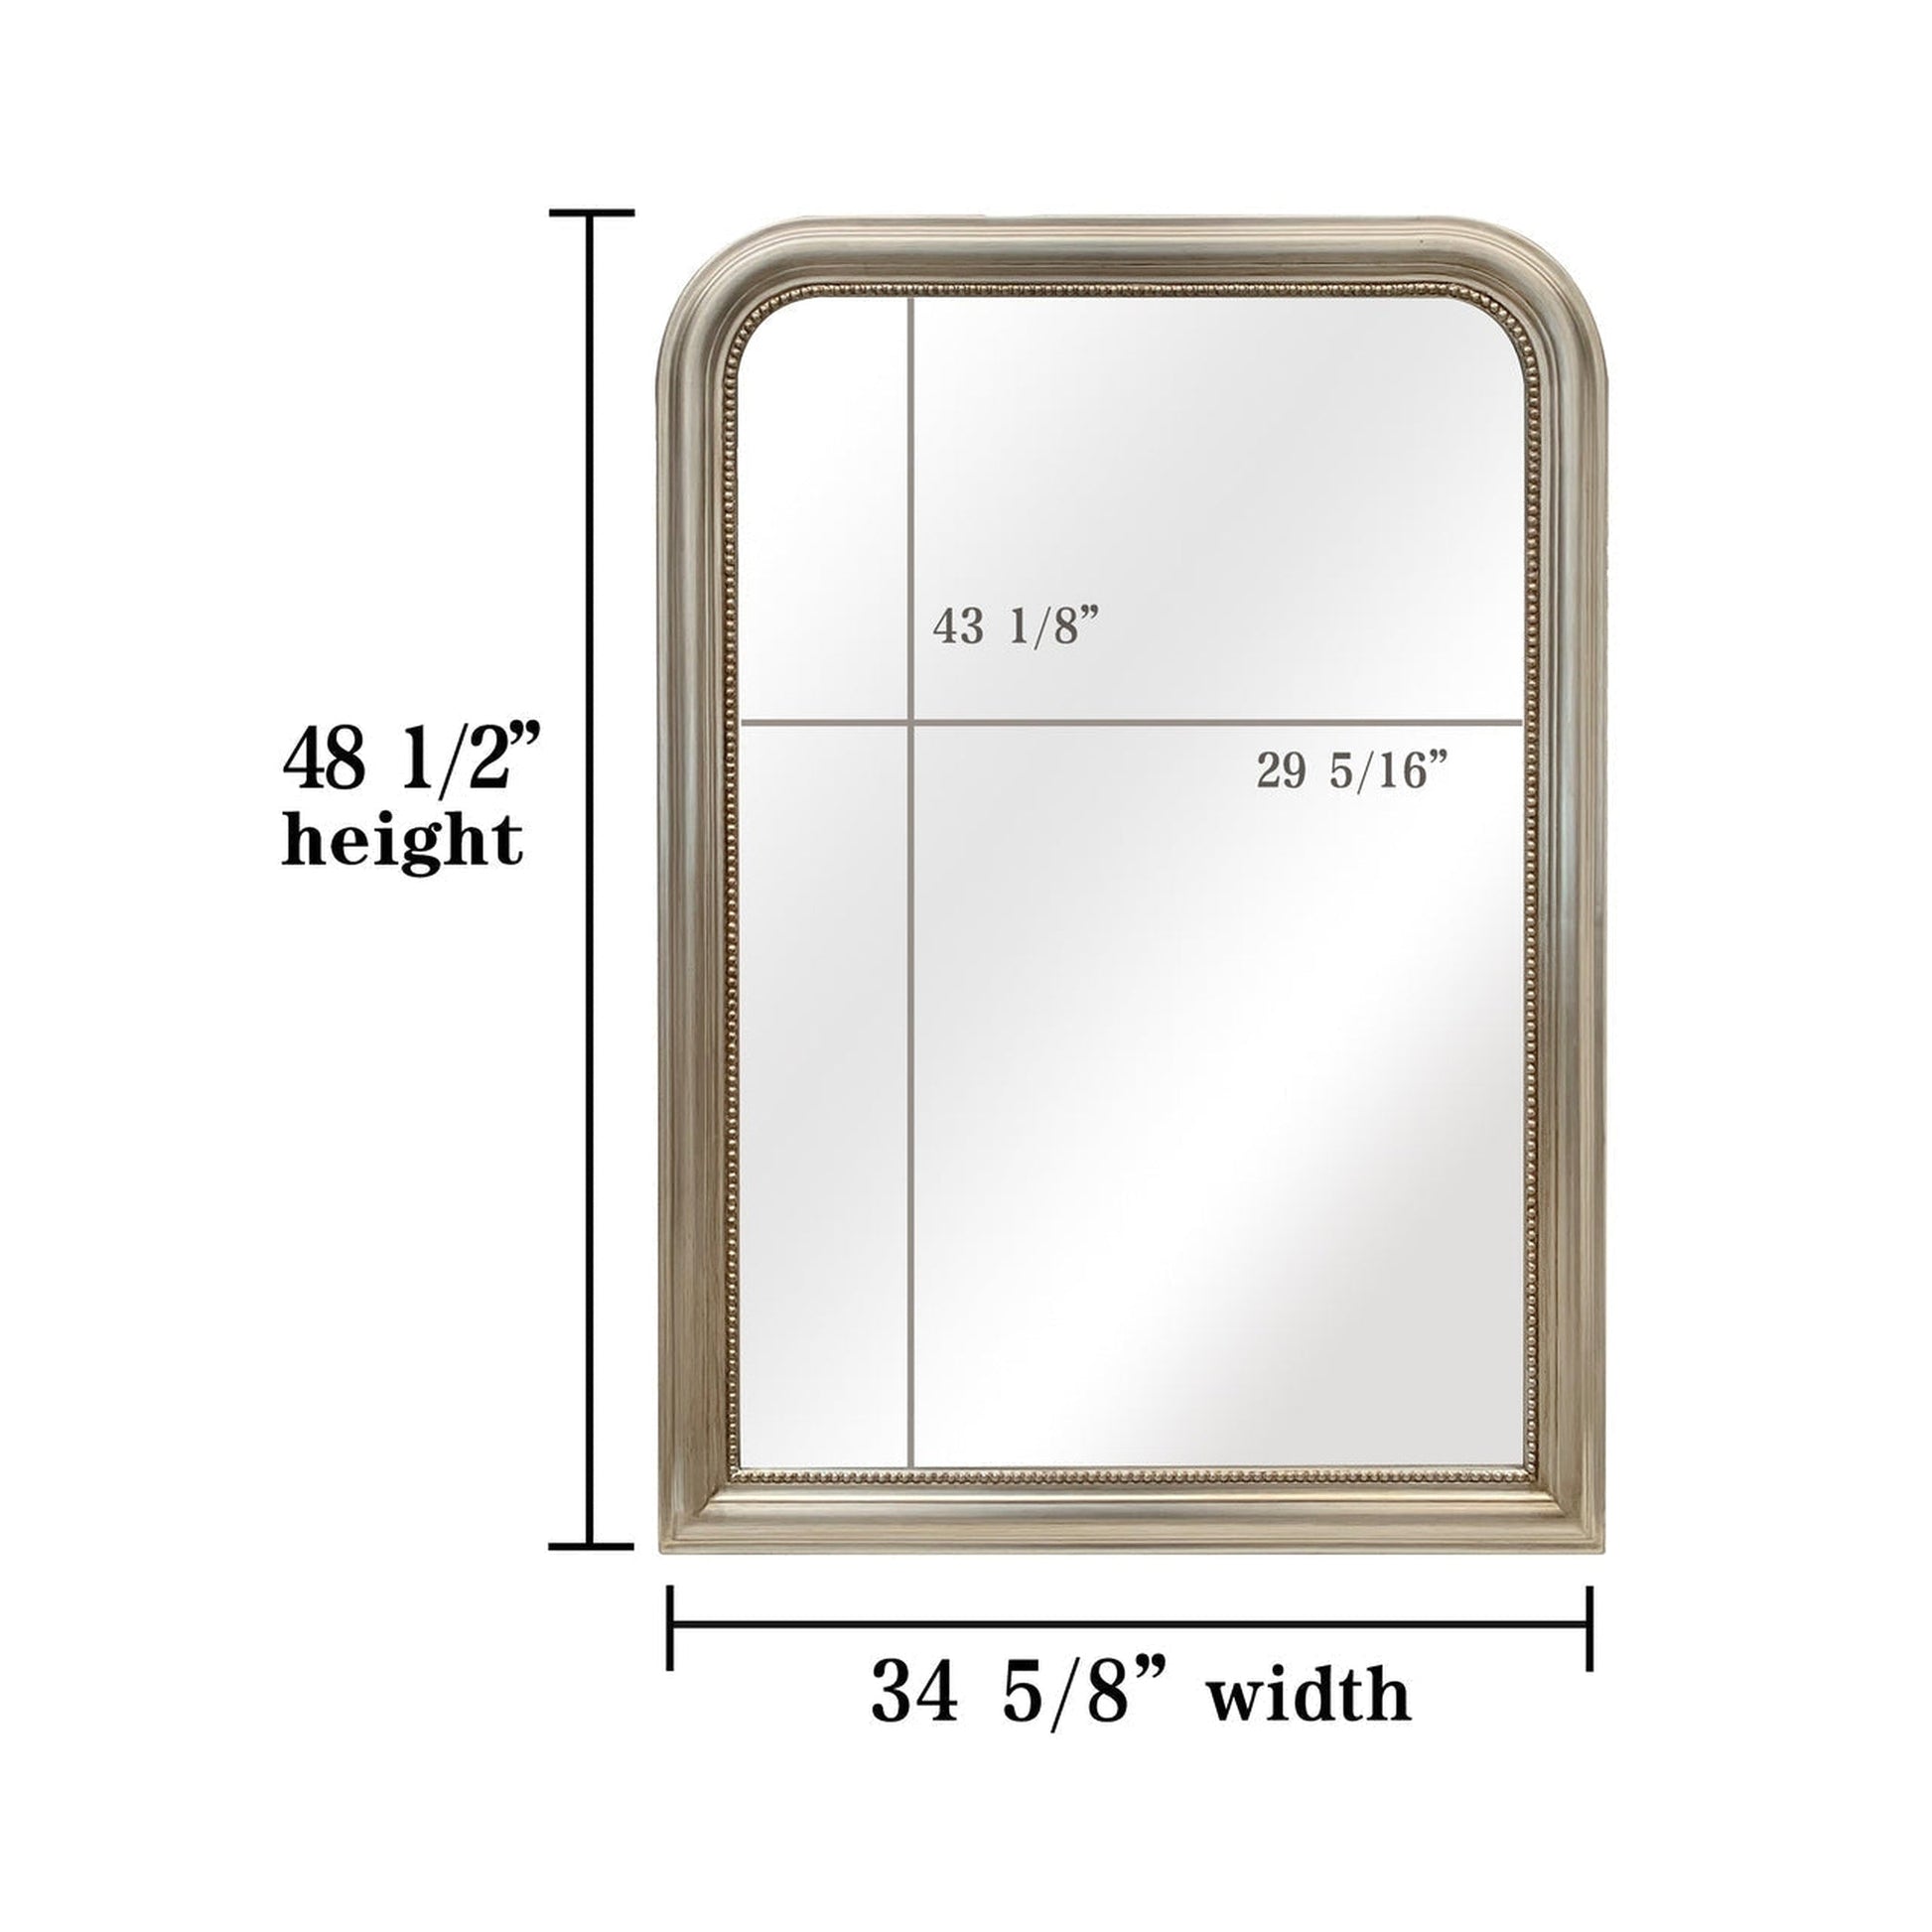 SBC Decor Duparc 31" x 48" Wall-Mounted Arched Wood Frame Accent Mirror In Champagne Gold Finish